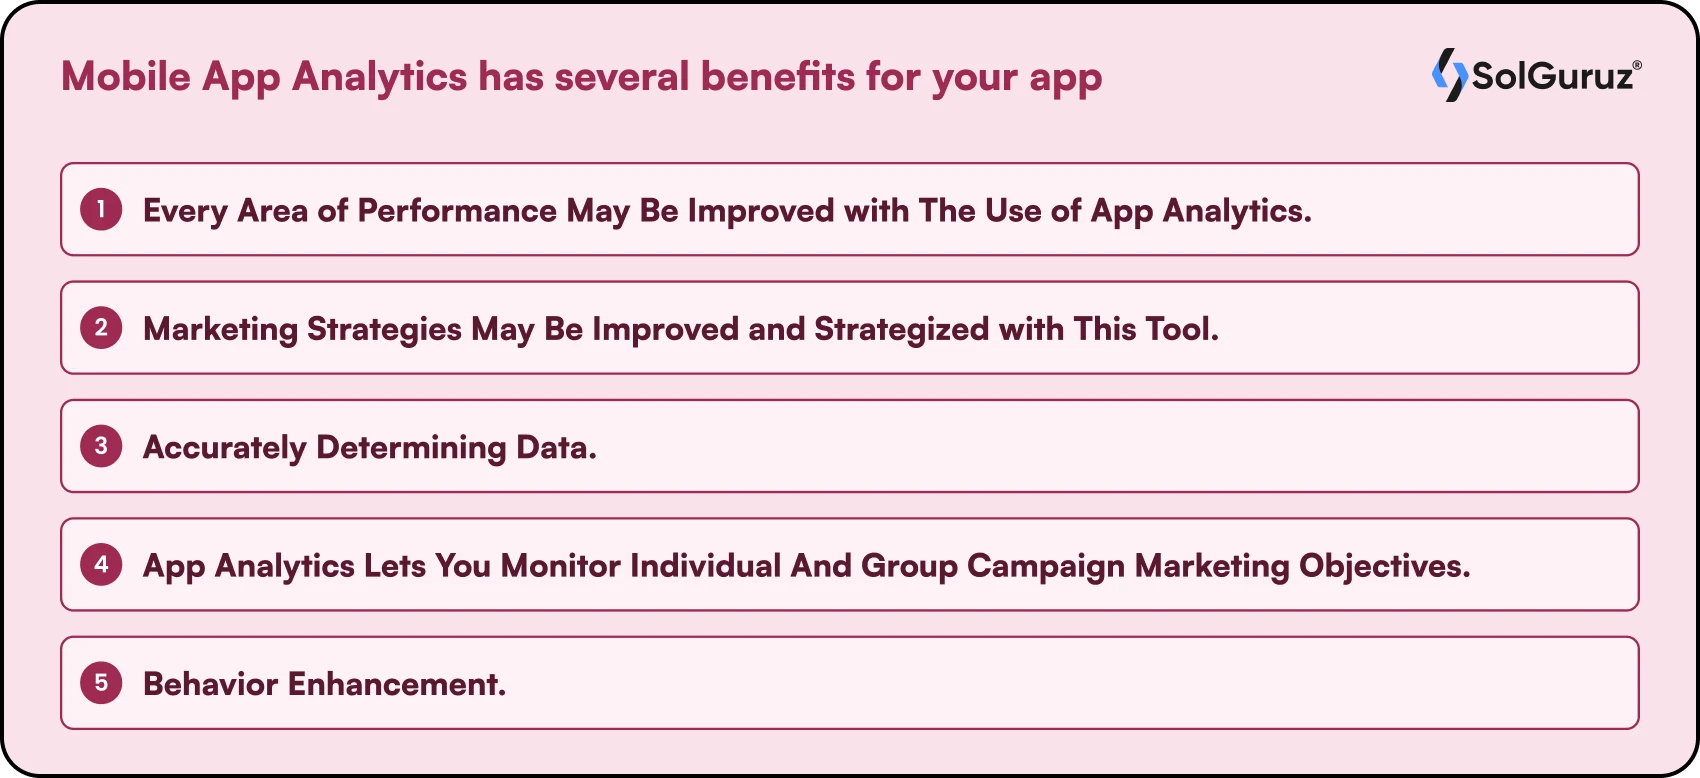 Mobile App Analytics has several benefits for your app